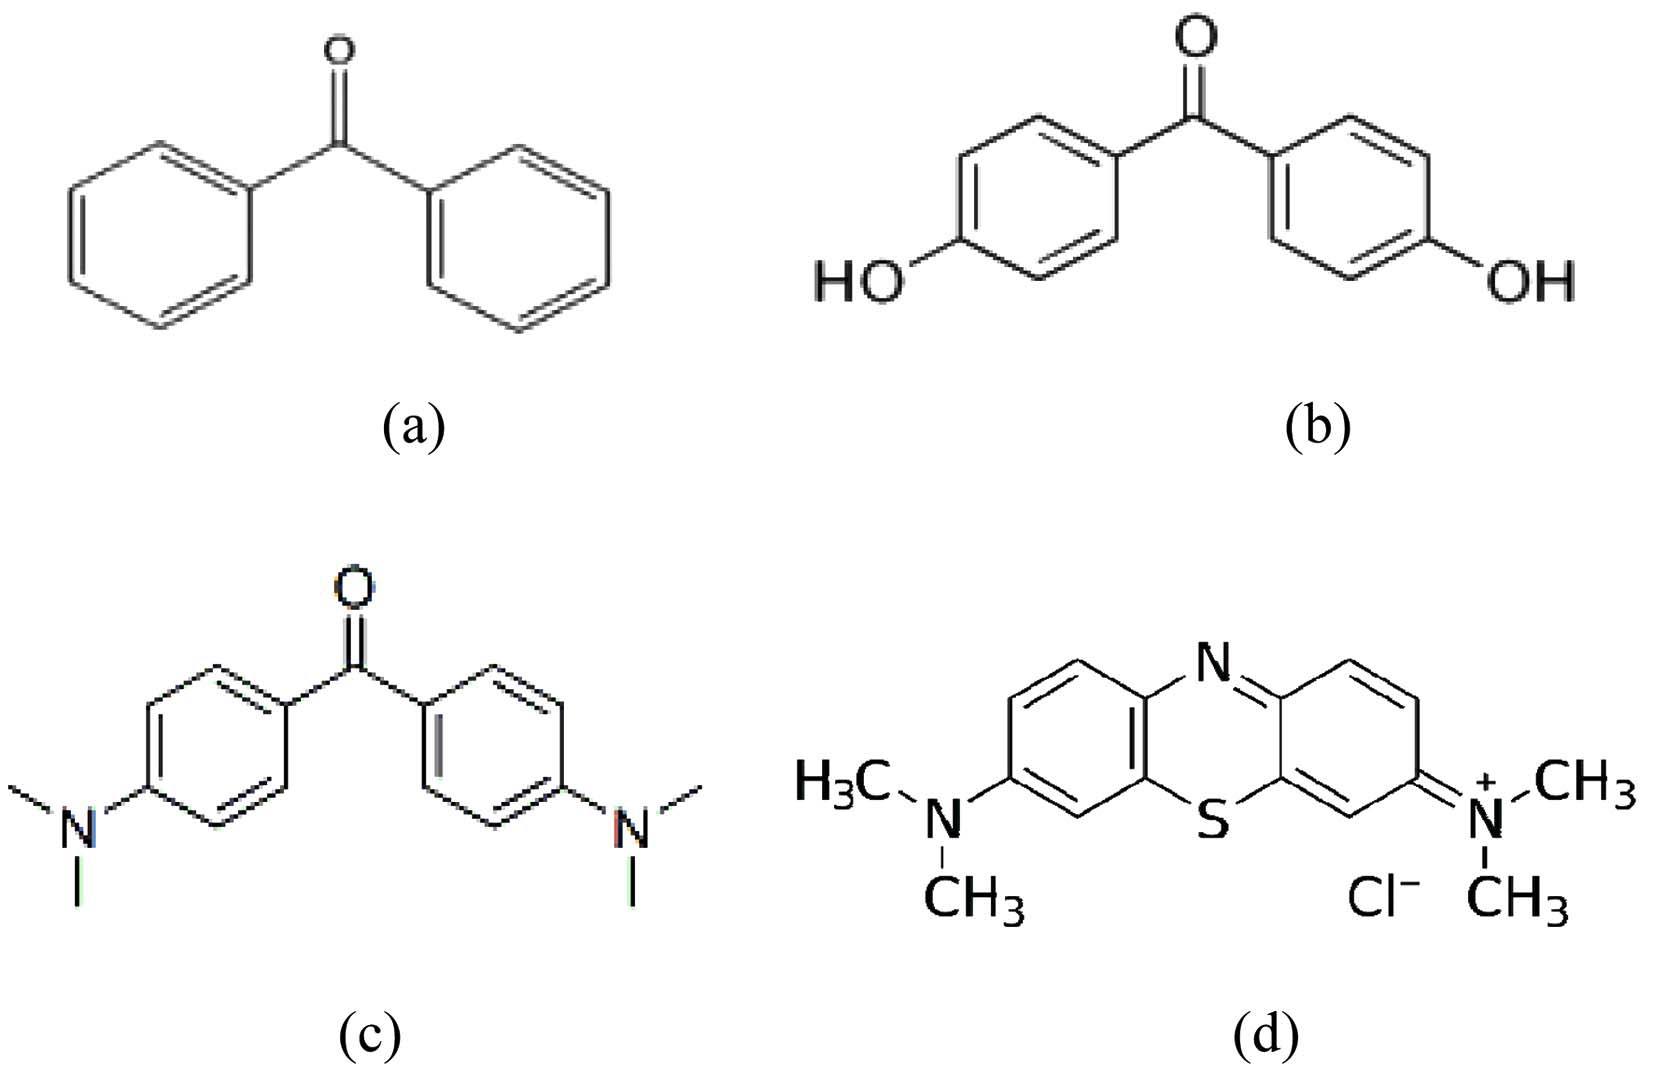 Chemical structures of photosensitizers; BP(a), DHBP(b), MK(c), and MB(d).